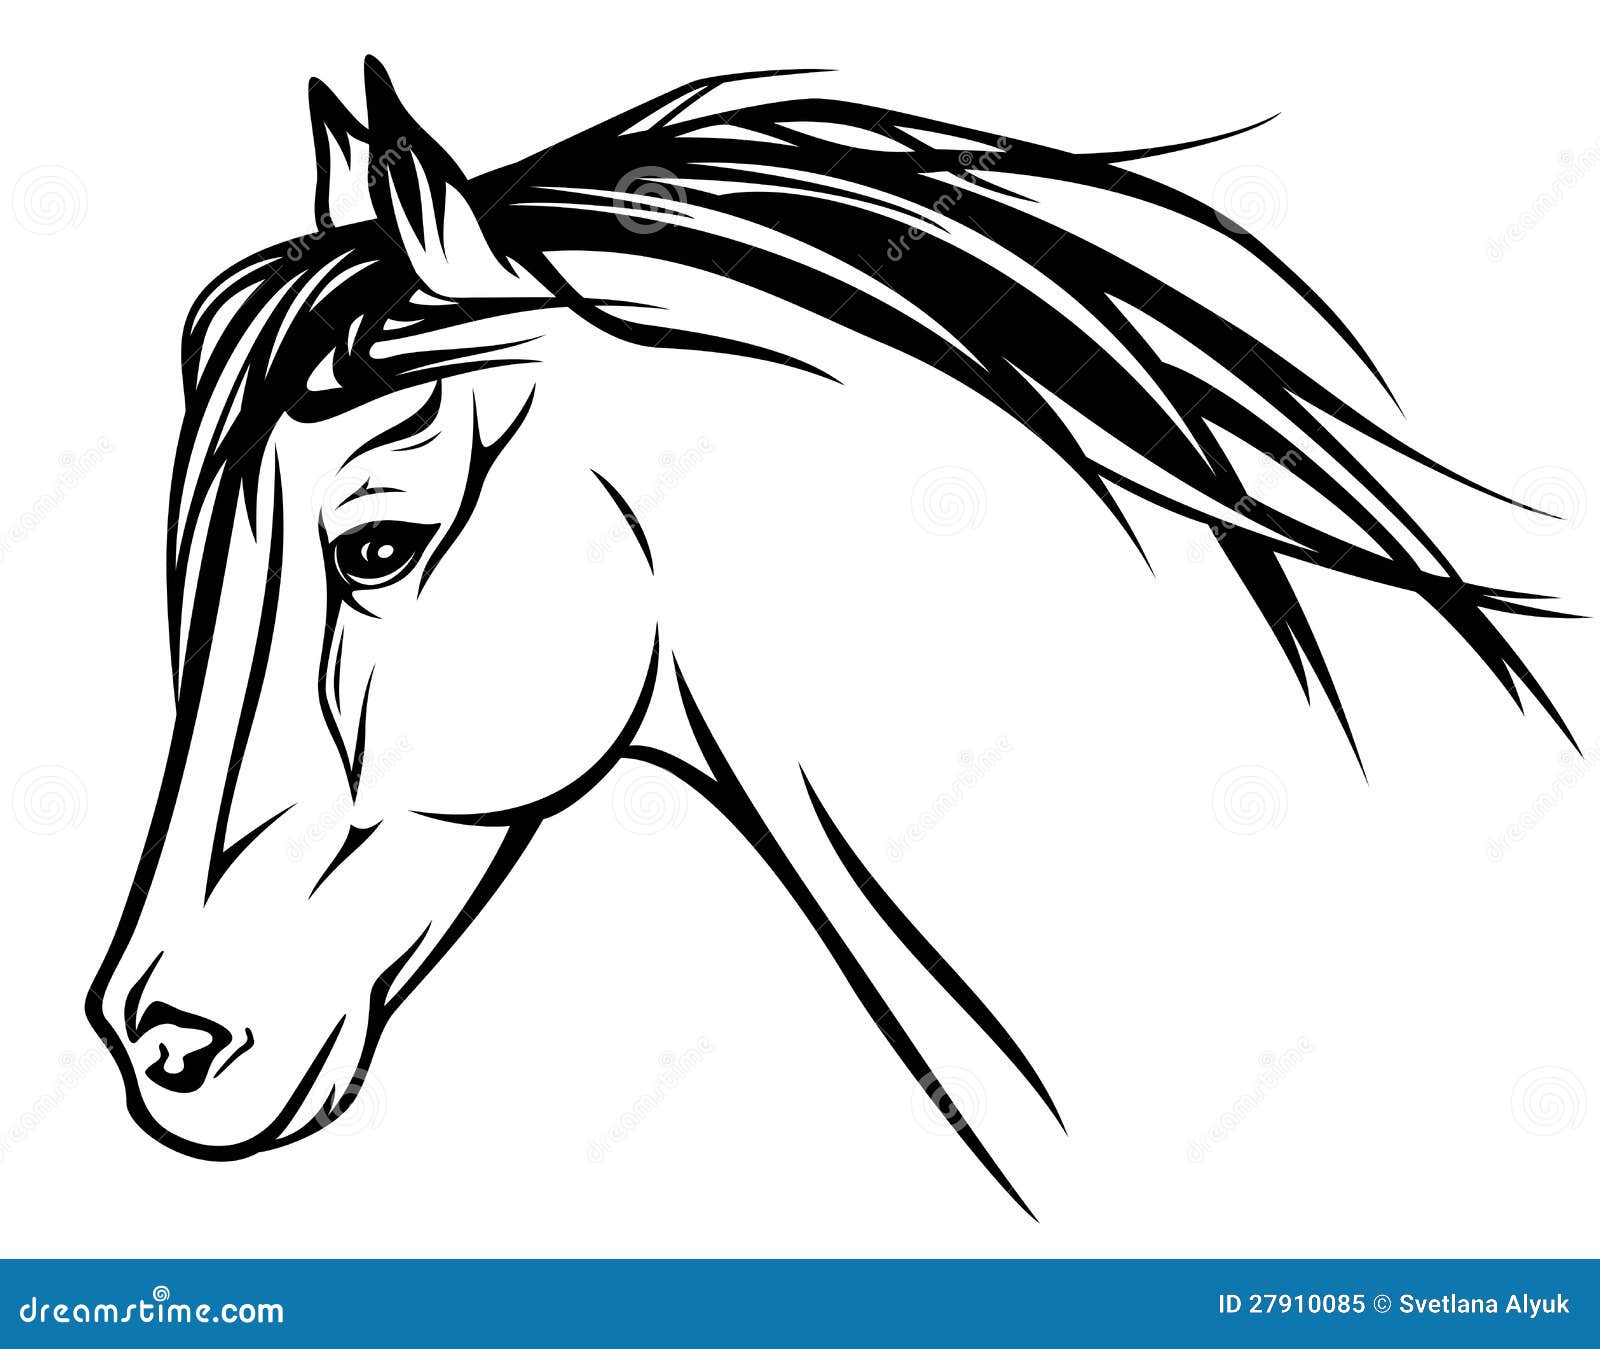 Easy How to Draw a Horse Head Tutorial and Horse Head Coloring Page | Horse  art drawing, Horse drawing tutorial, Horse drawings